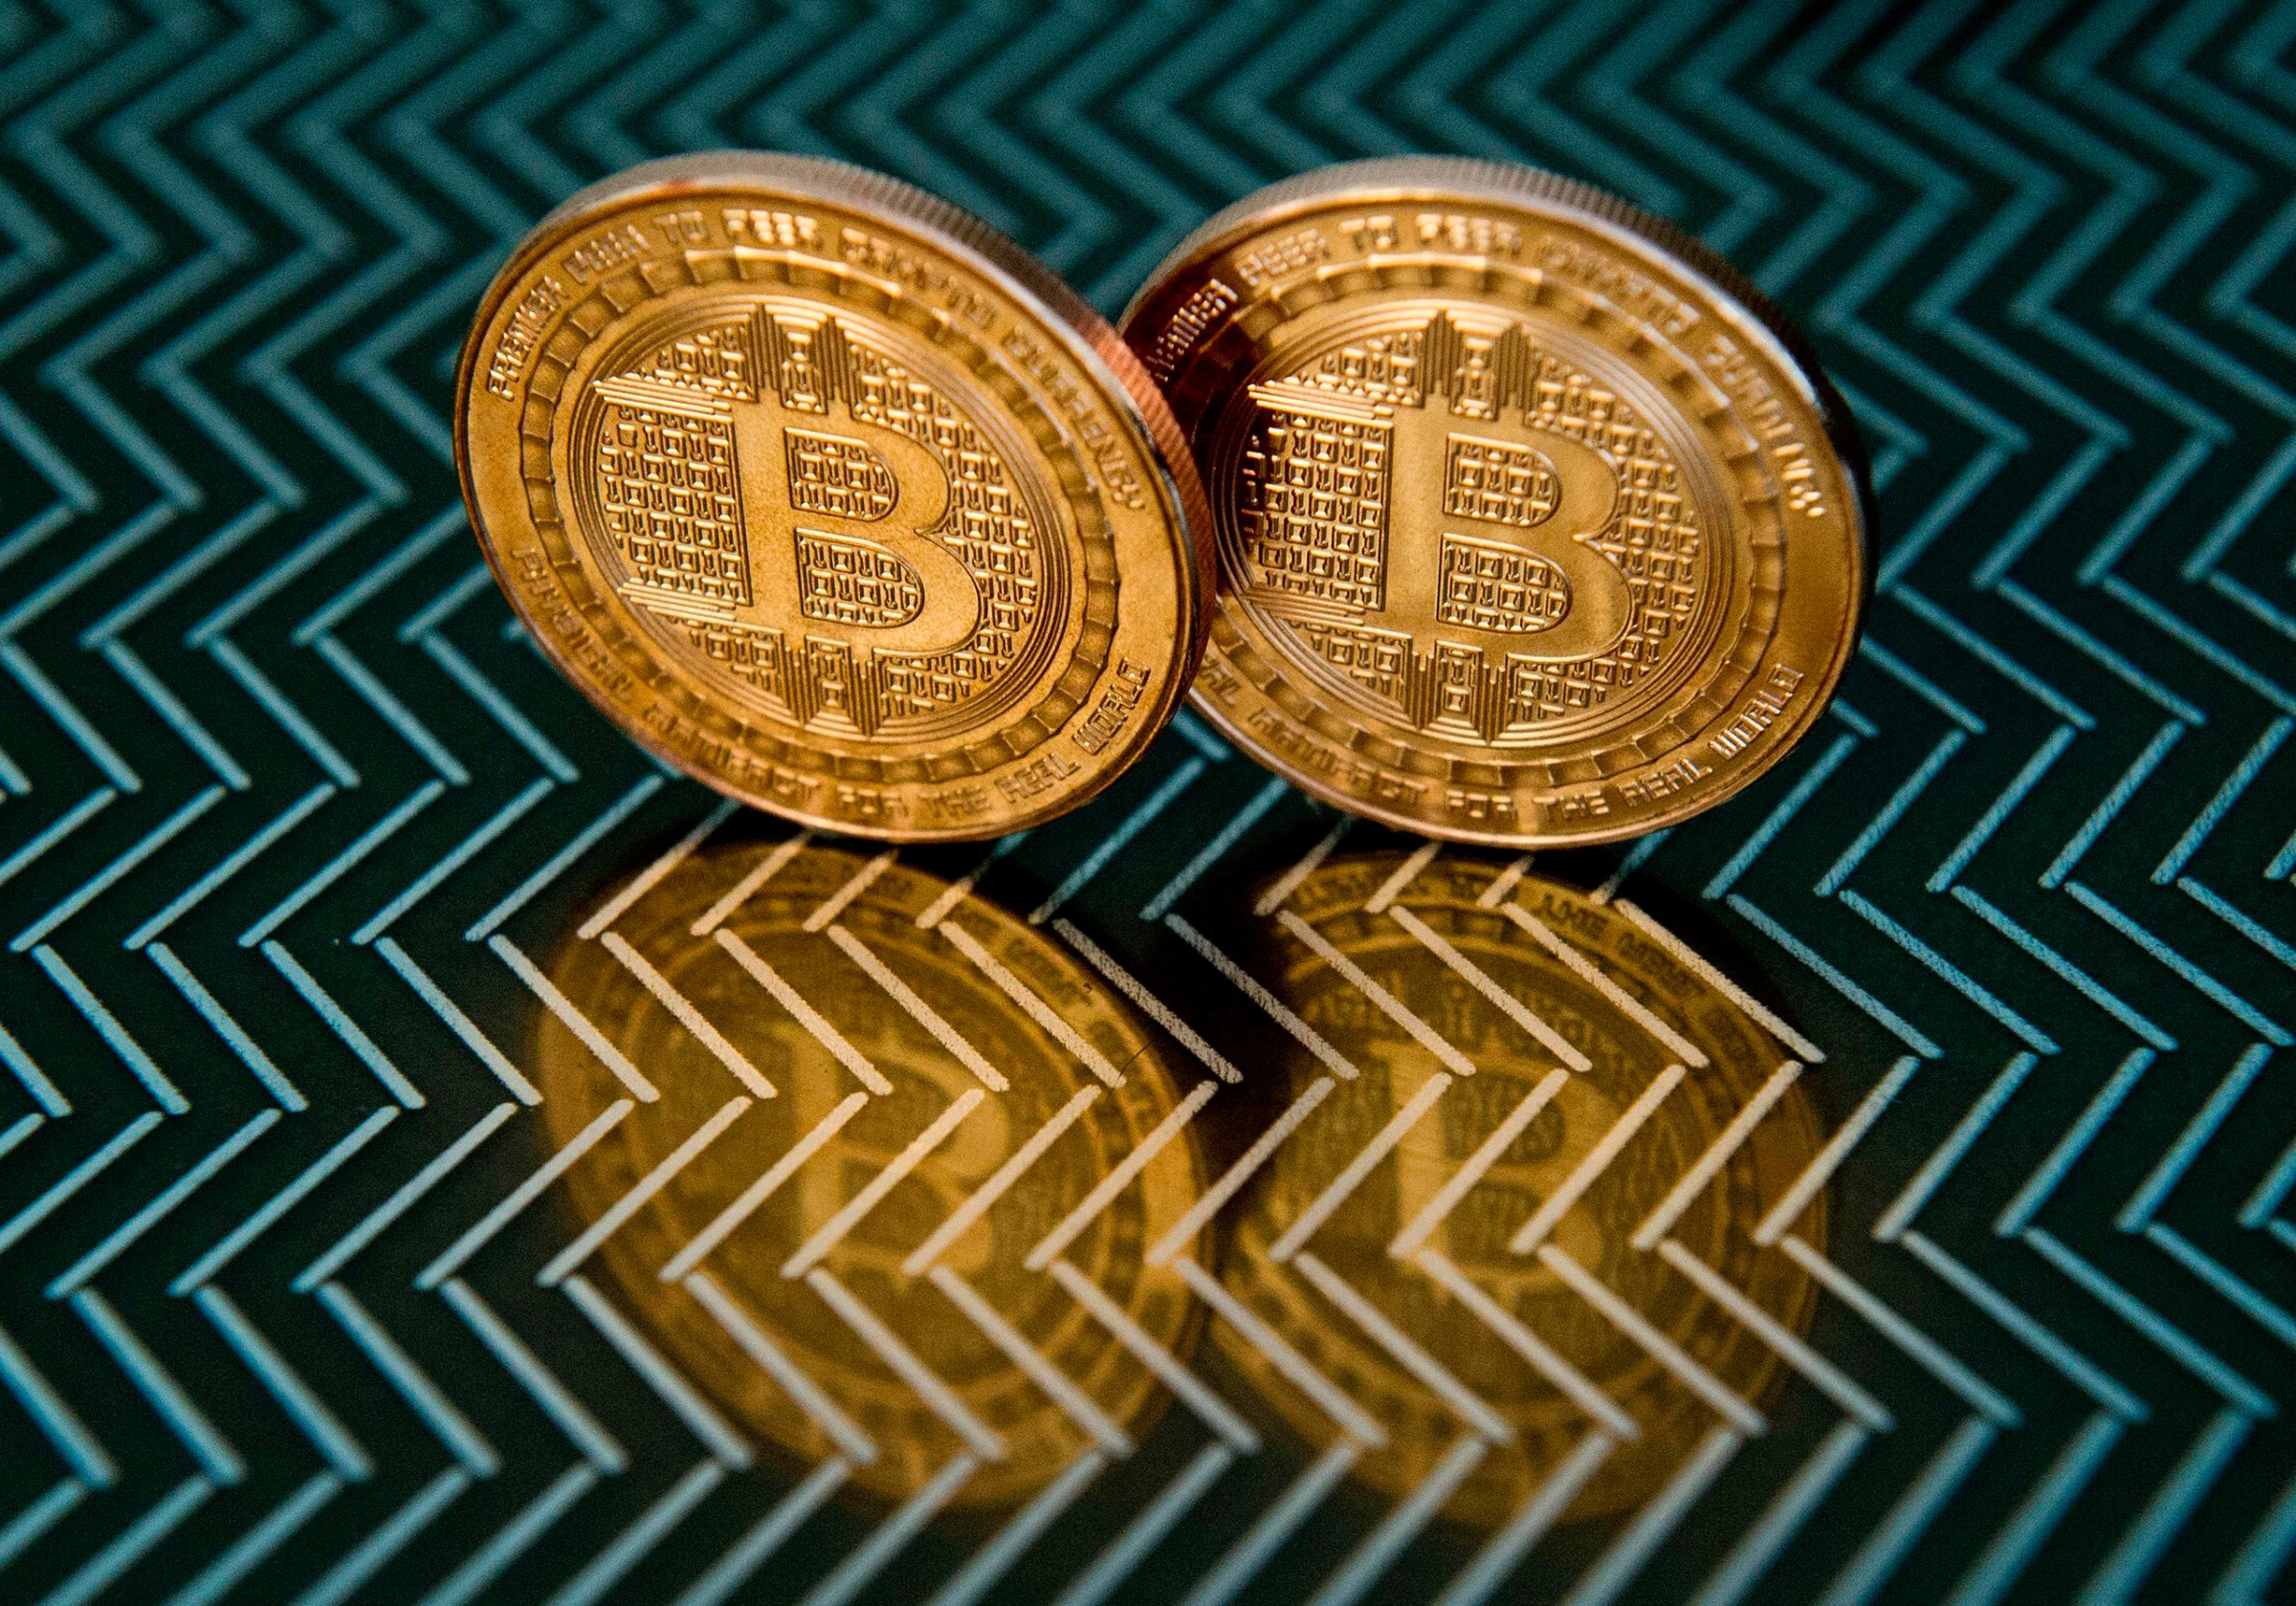 Bitcoin medals are seen in Washington, June 17, 2014. On May 2, an Australian entrepreneur, identified as Craig Wright, revealed himself as the creator following years of speculation about who invented the pioneering digital currency.